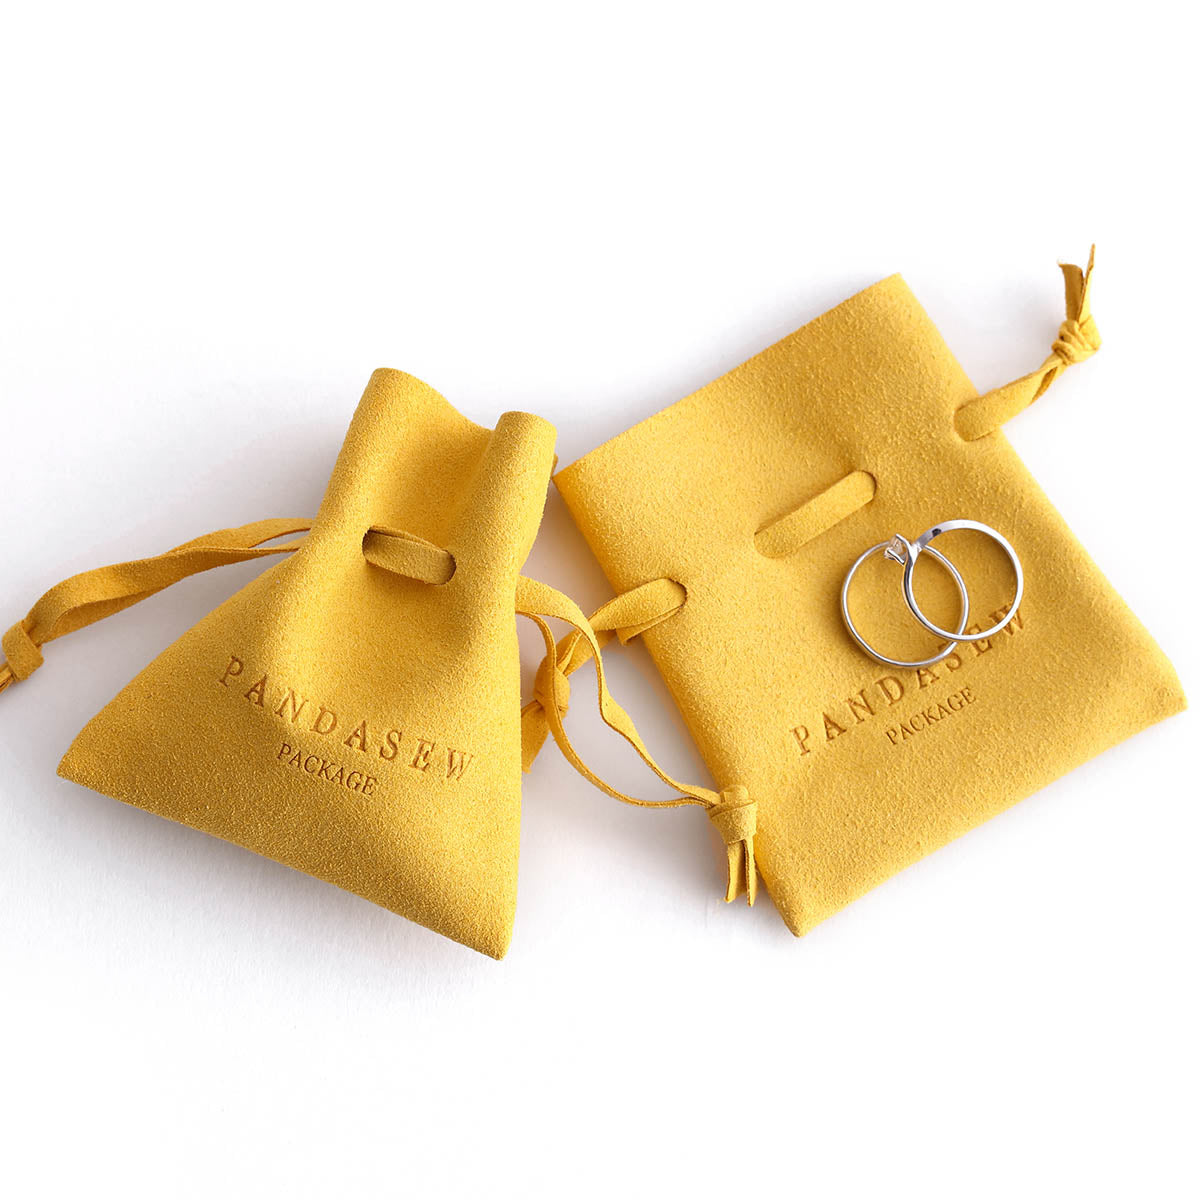 Ladurée bag charm and other gifts - The Graphic Foodie